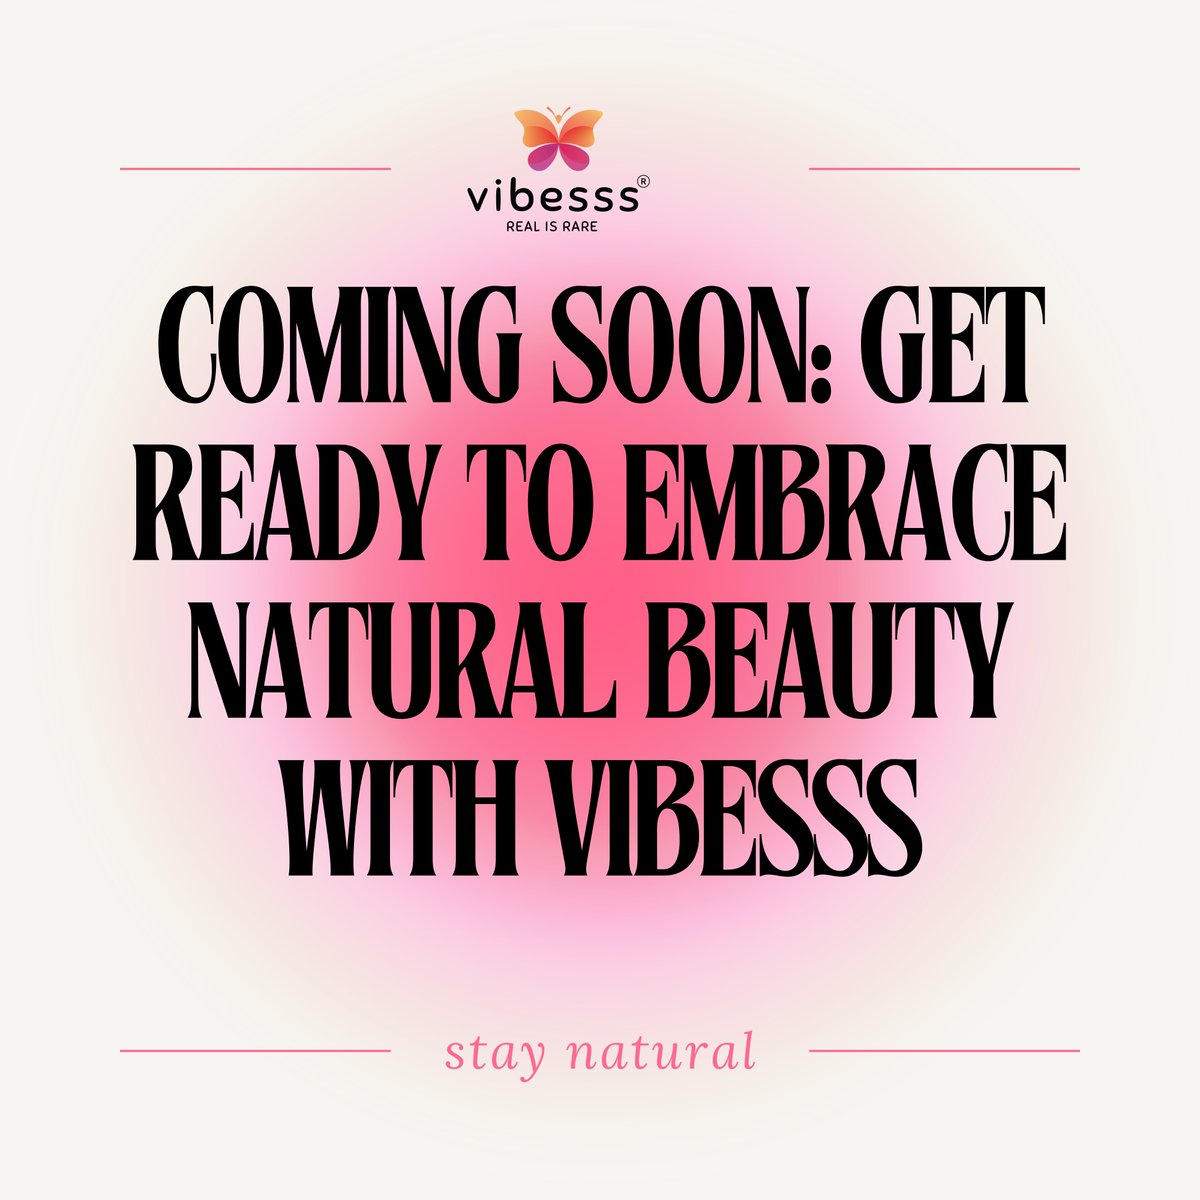 Coming Soon: Get Ready to Embrace Natural Beauty with Vibesss

#VibesssIndia #VibesssProducts #VibesssGulabjal #VibesssRealisrear #VibesssProduct #Comingsoon #Launchingsoon #realisrare #vibesssrosenerfacemist #Comingsoon